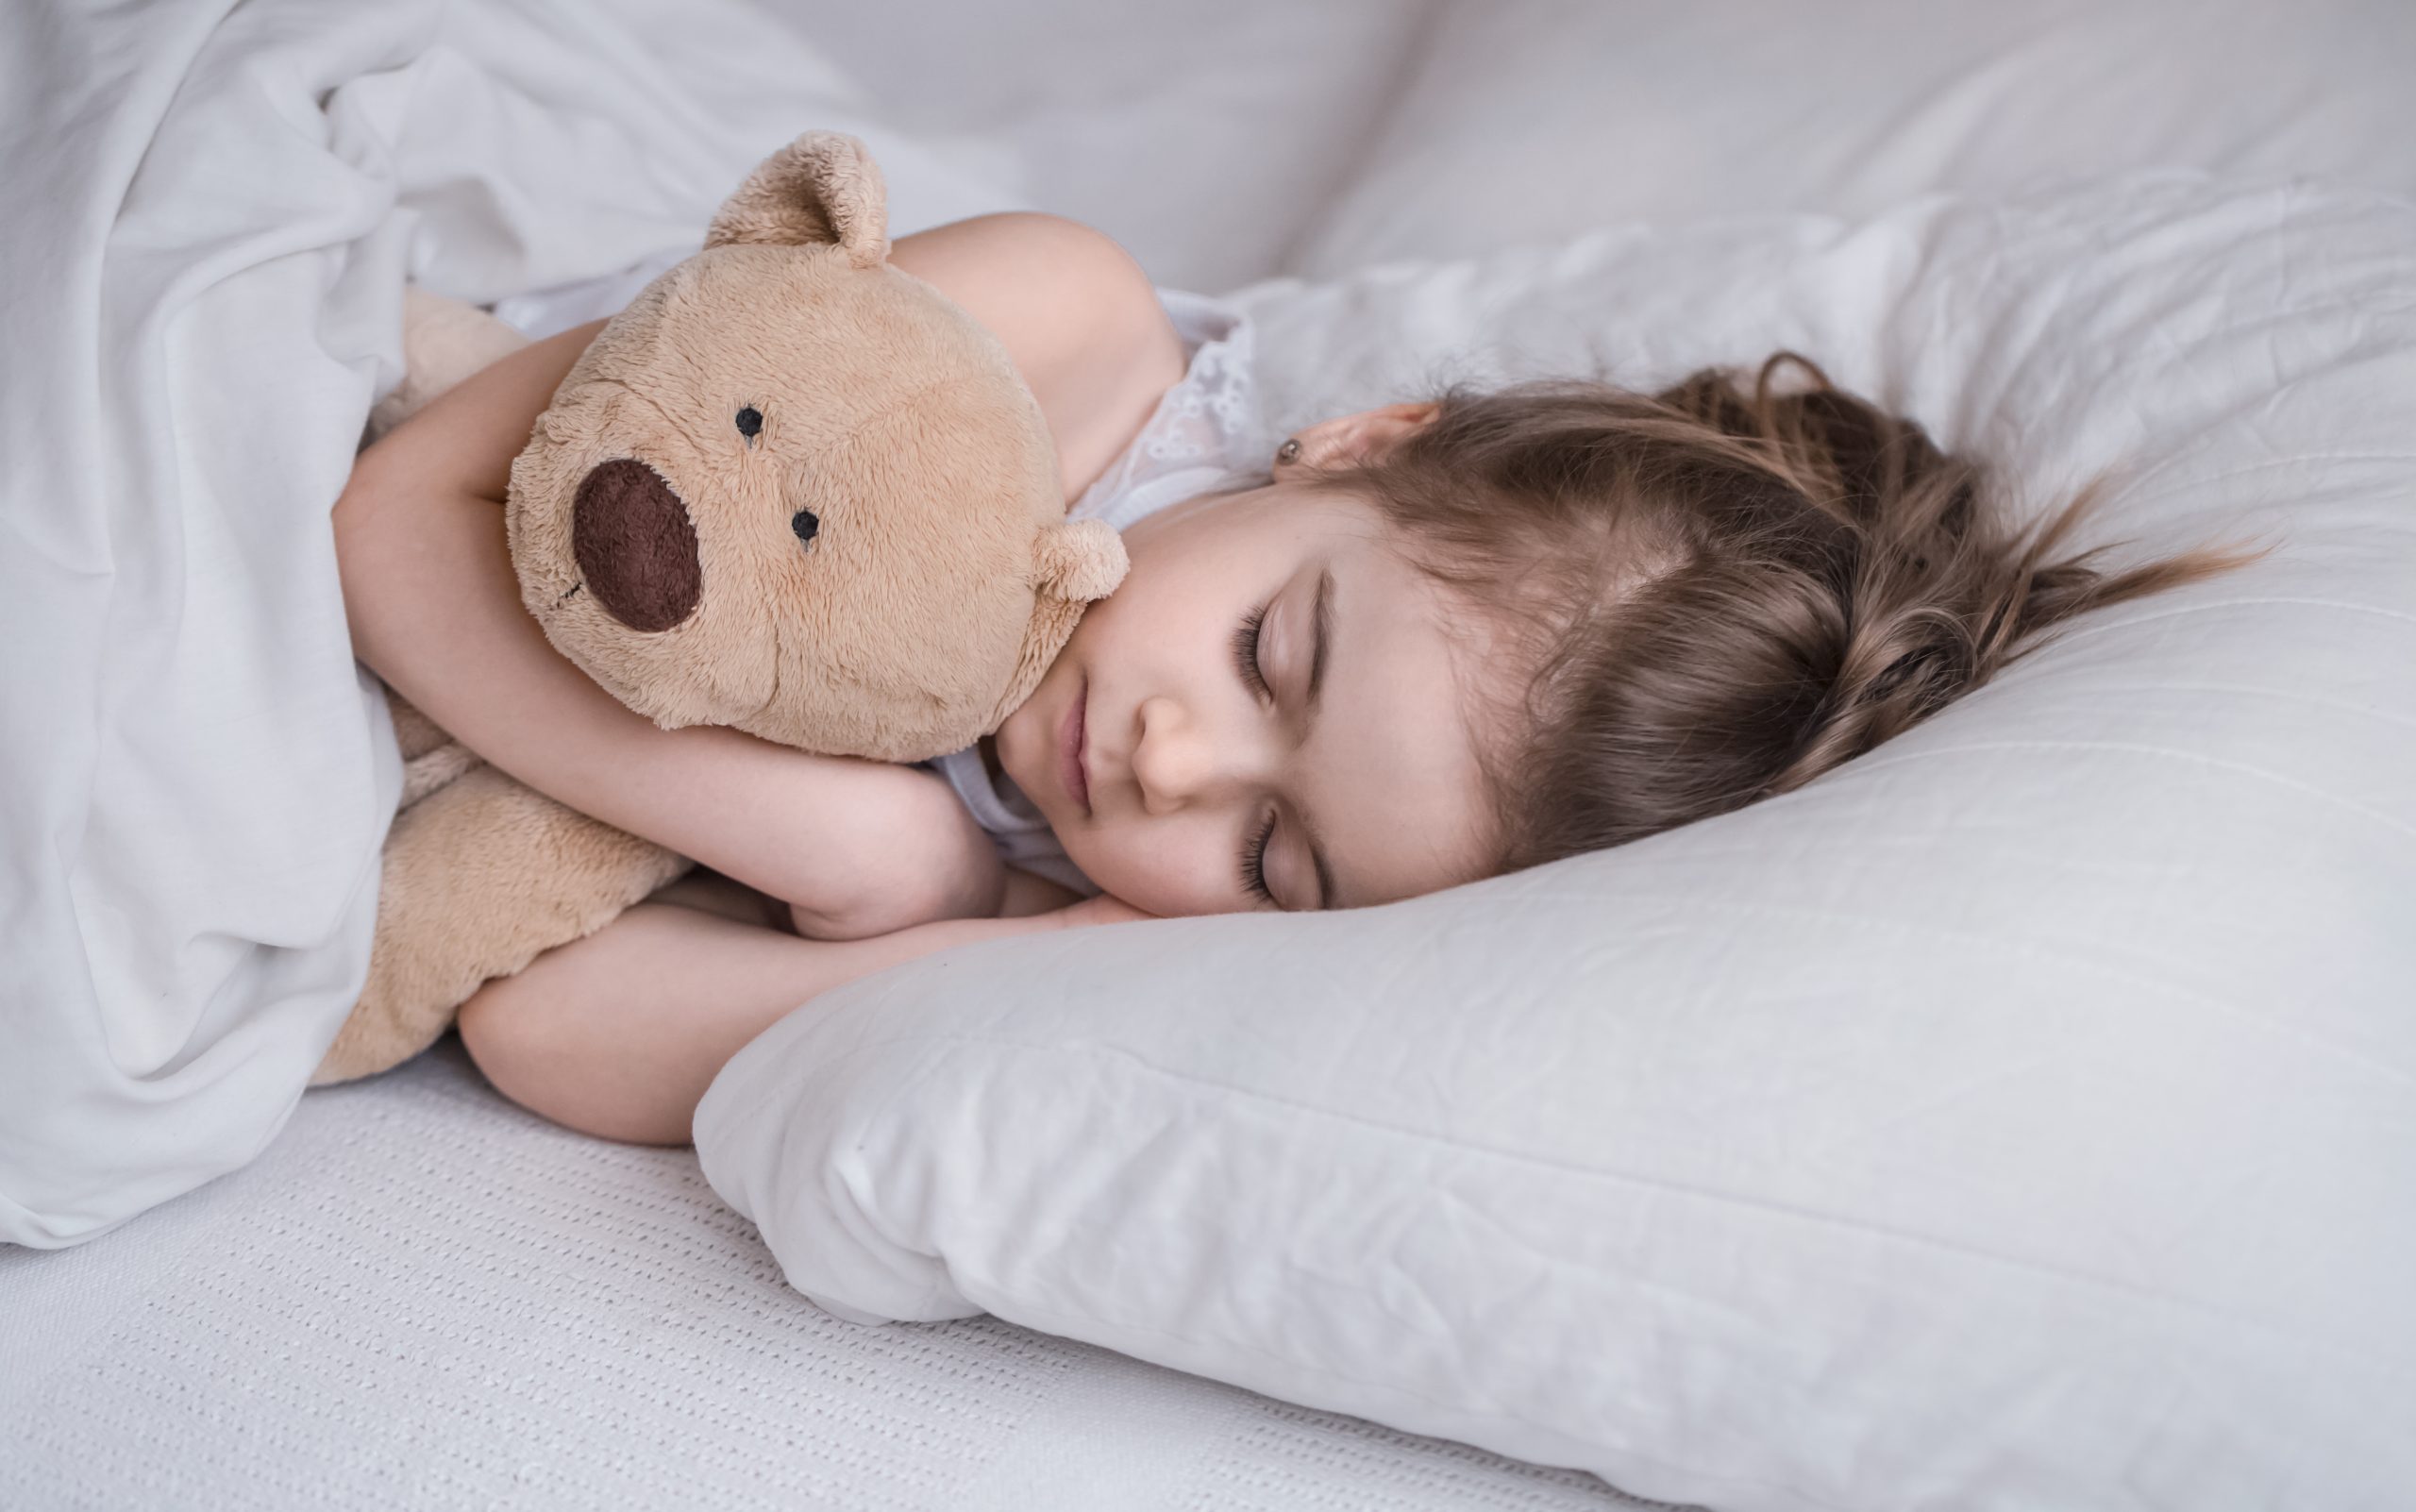 Cute little girl sleeps sweetly in a white cozy bed with a soft bear toy, the concept of children's rest and sleep